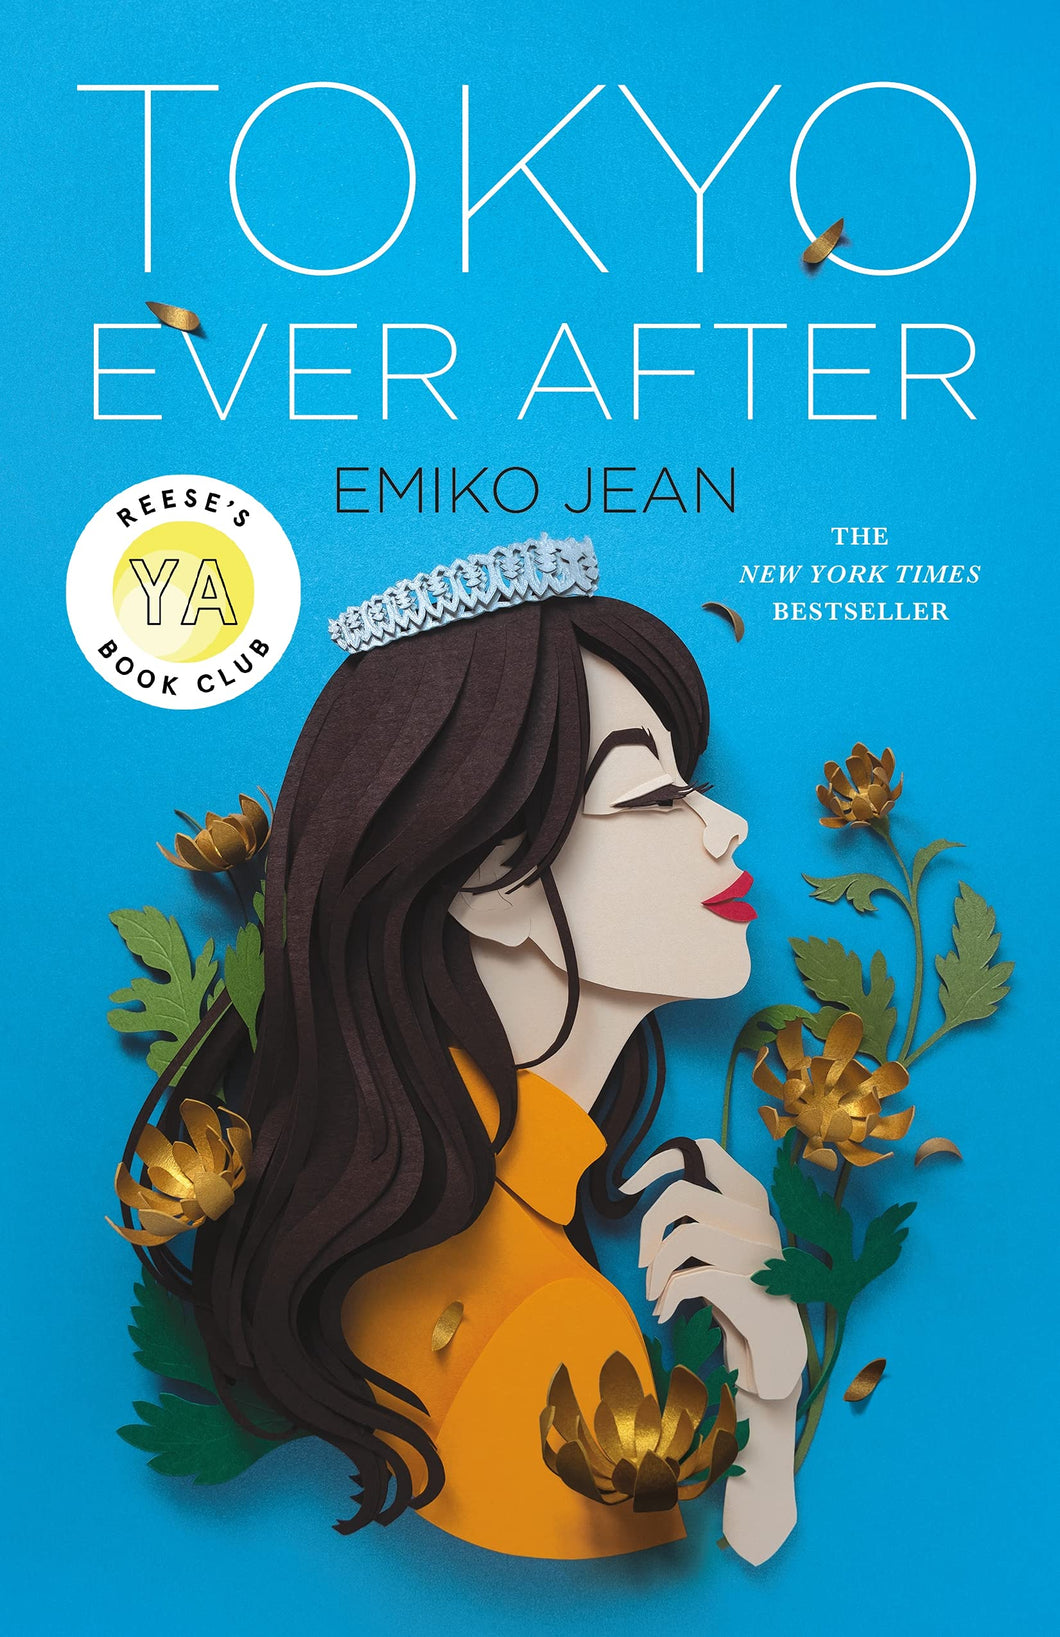 Tokyo Ever After by Emiko Jean / Hardcover - NEW BOOK